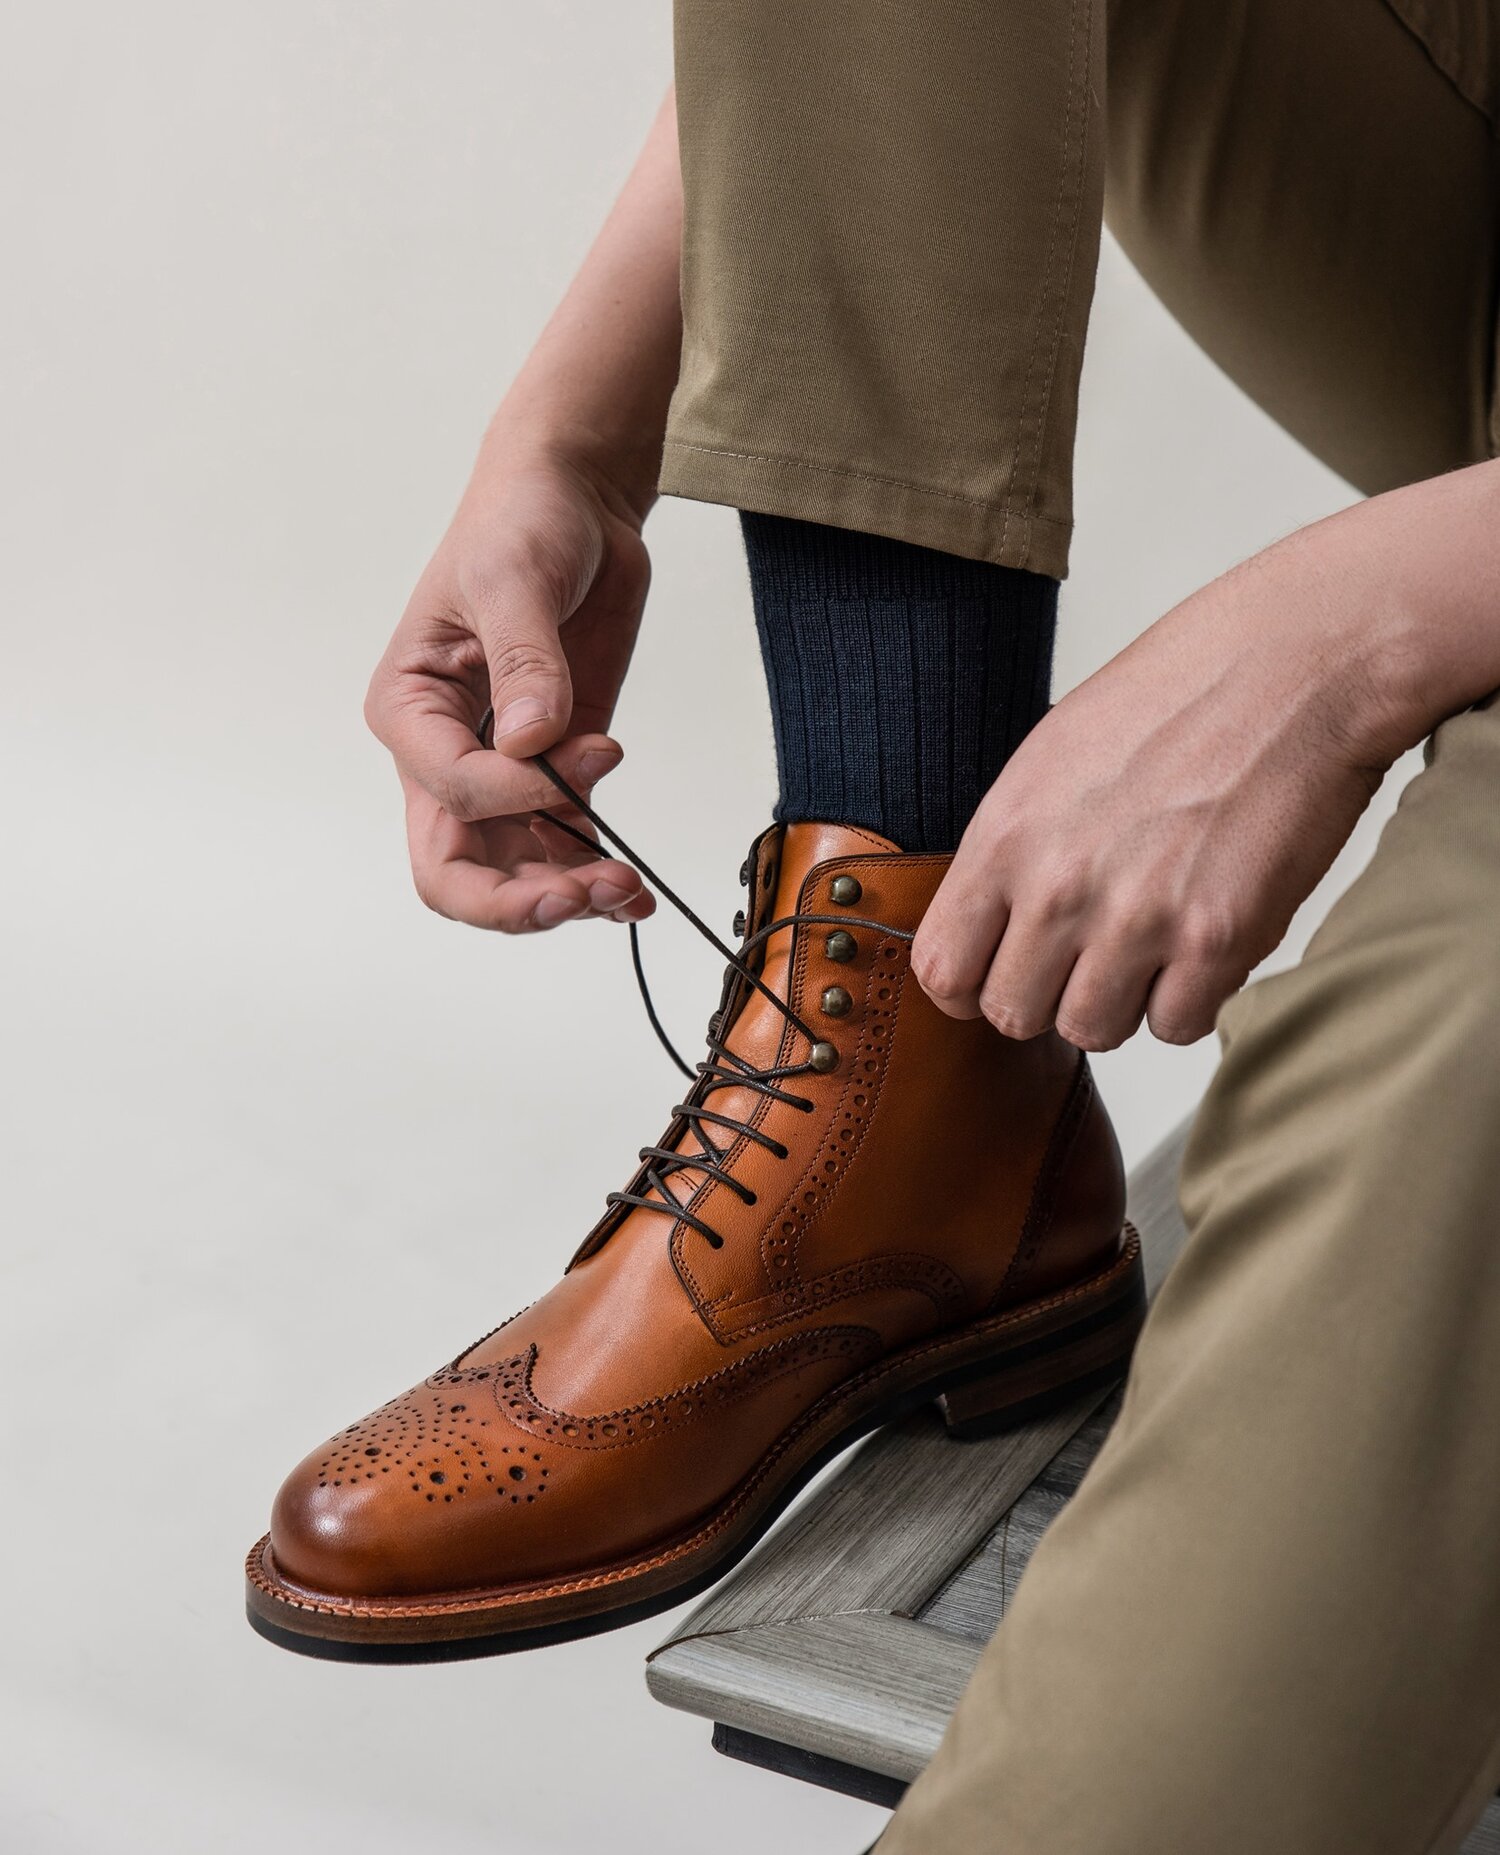 adelig Sherlock Holmes Dyrke motion 12 Sustainable Men's Shoe Brands Your Feet And The Planet Will Love —  Sustainably Chic